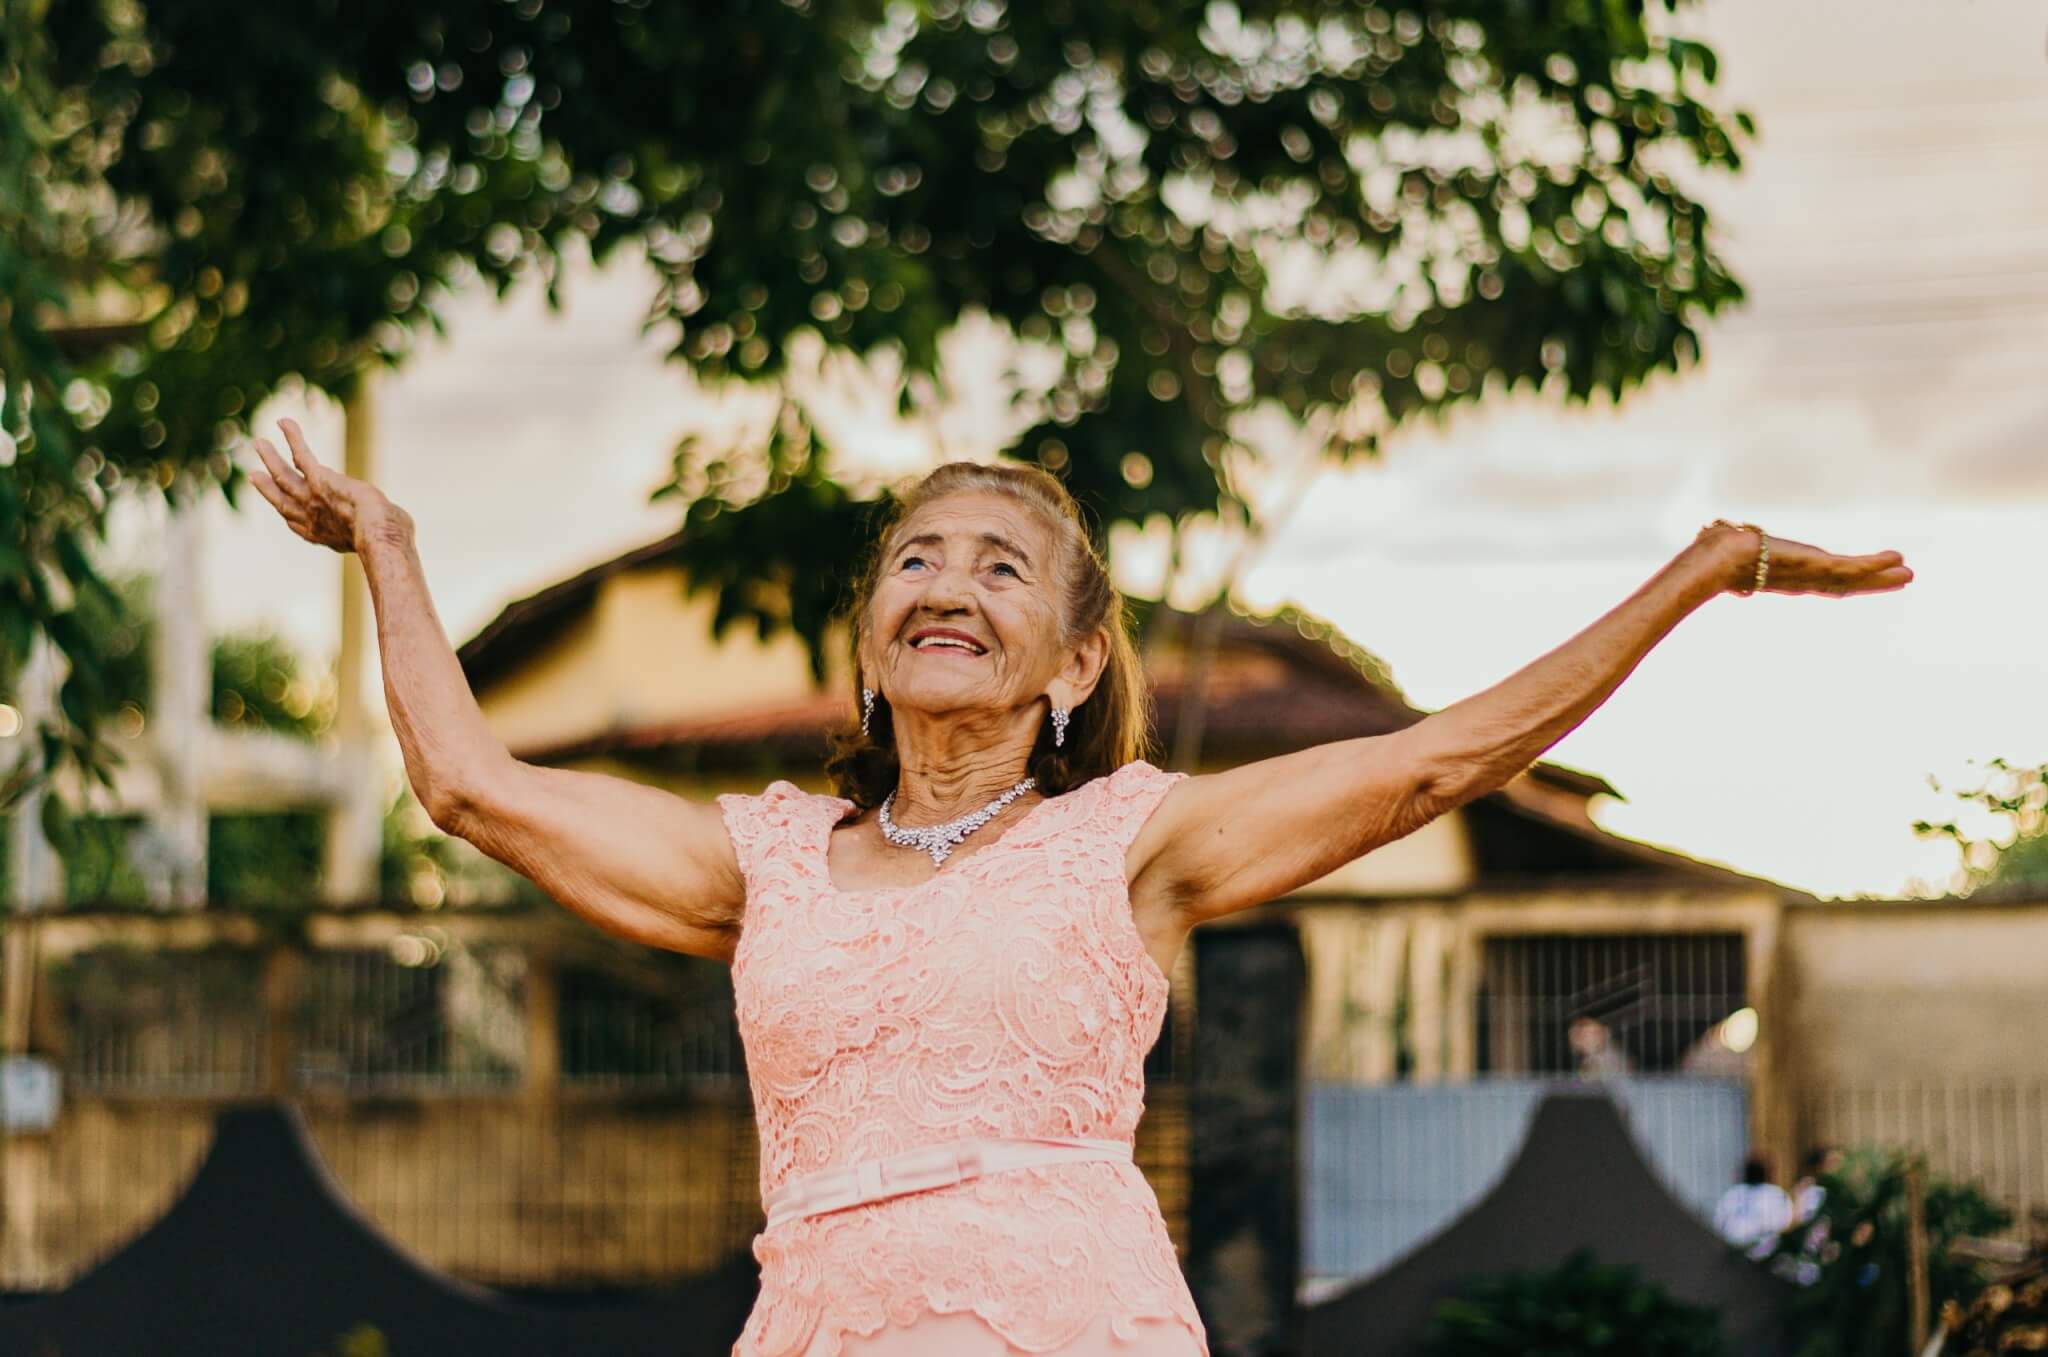 Long, happy life: Elderly woman with hands in the air